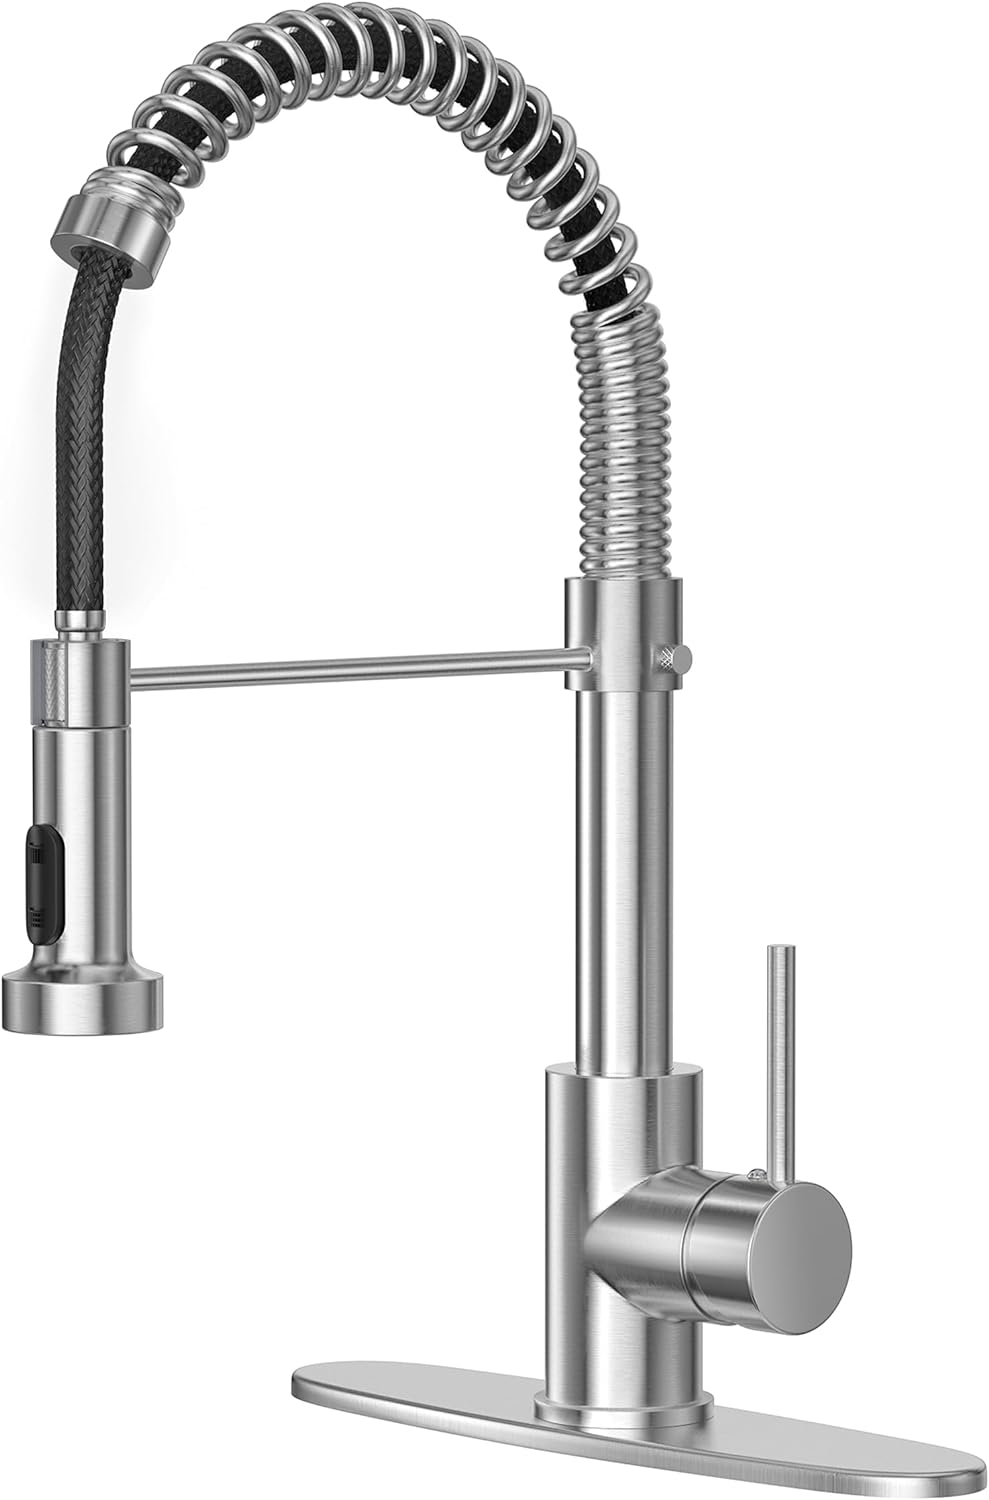 IBOFYY Single Handle Commercial Kitchen Sink Faucet with Multifunctional Pull-Down Spout (Brushed Nickel)